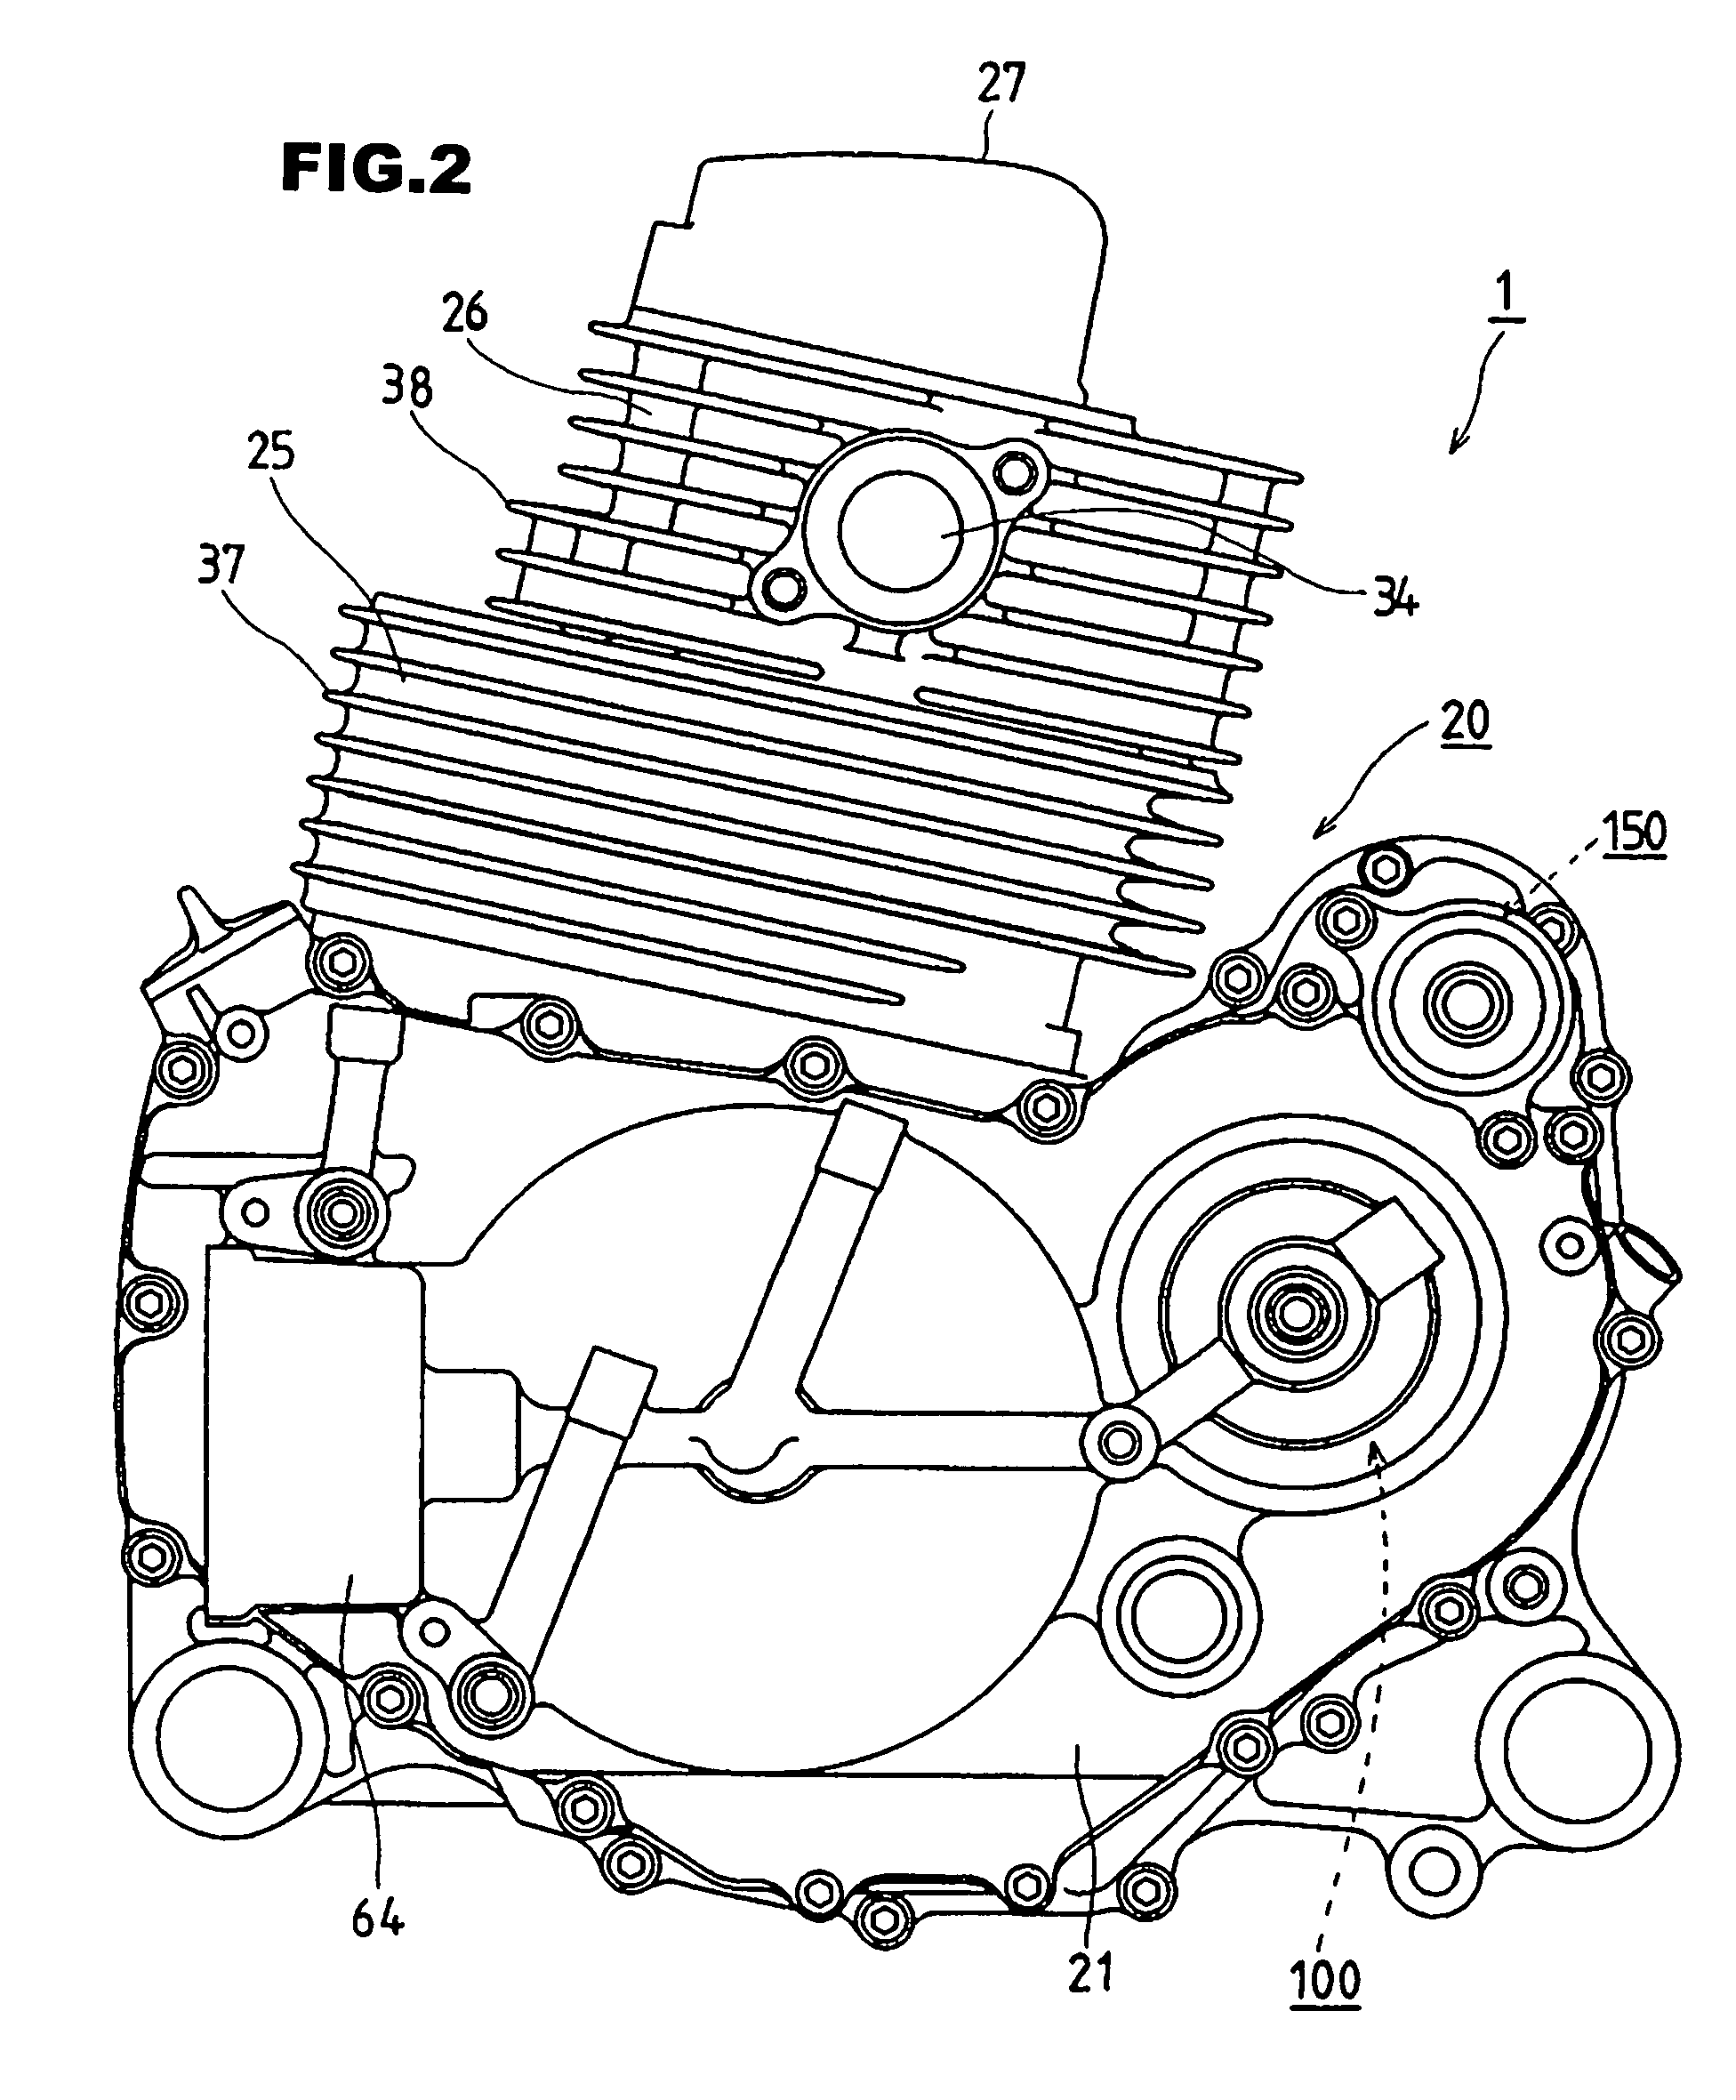 Power unit for vehicle with internal combustion engine